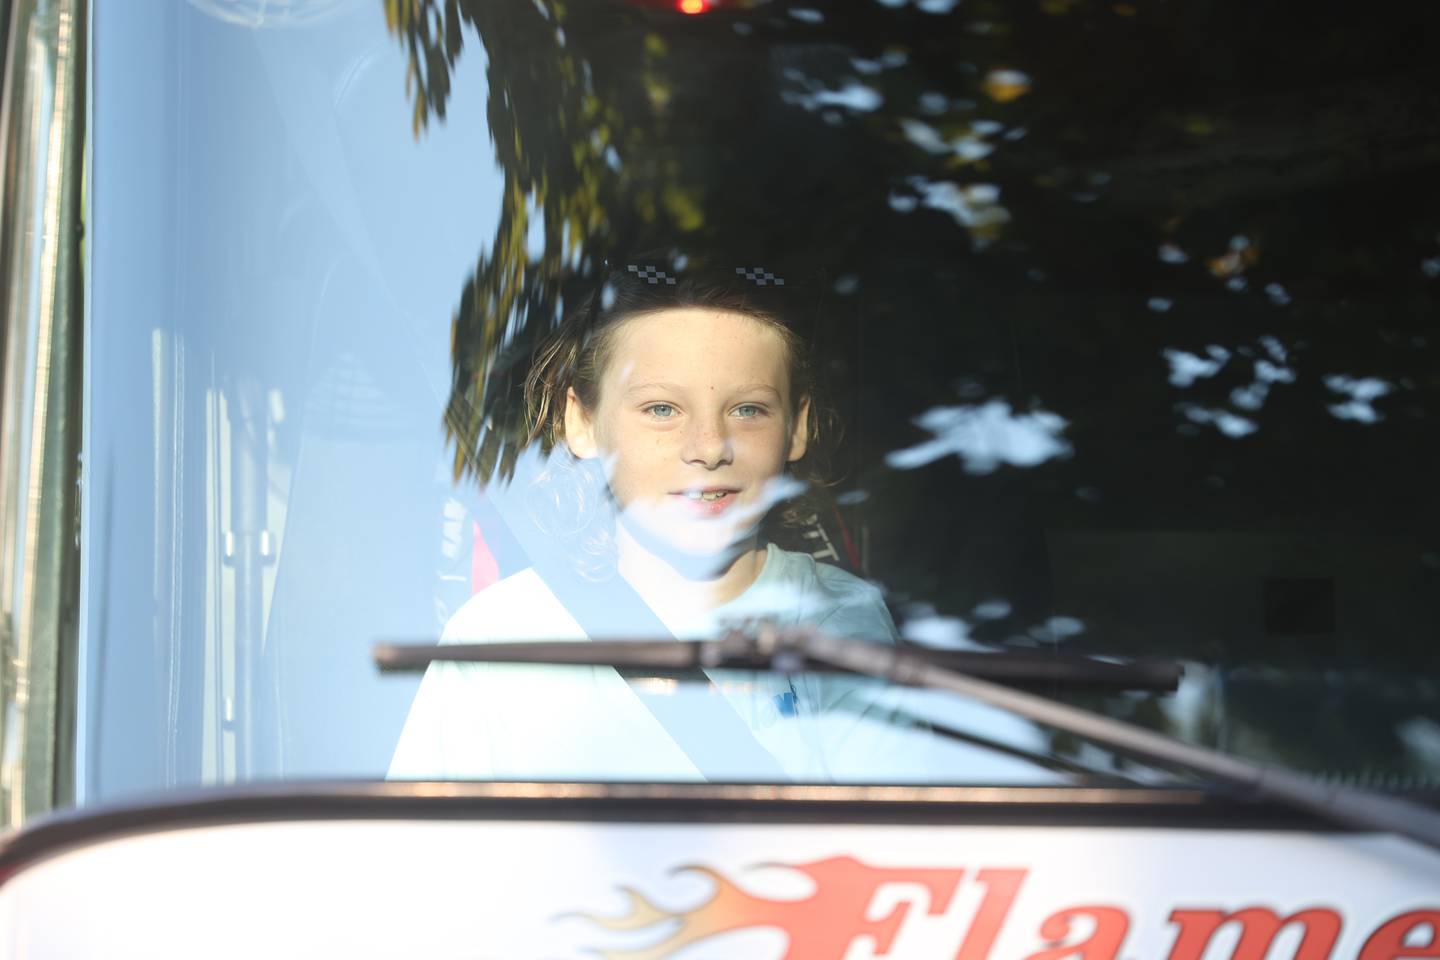 4th grader William Zaffino won a raffle to get a ride in a fire truck to his first day of school at Eisenhower Academy in Joliet. Wednesday, Aug. 17, 2022, in Joliet.